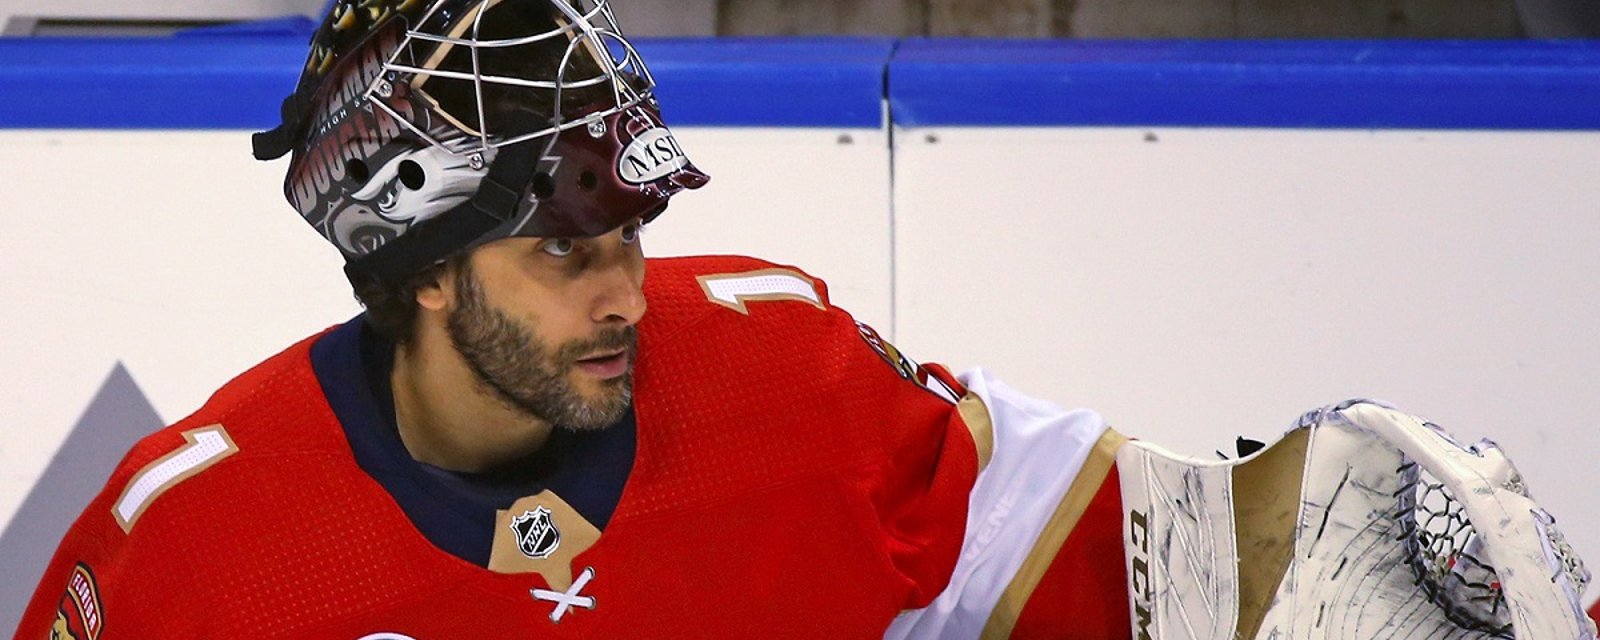 Roberto Luongo will have his jersey retired this season.